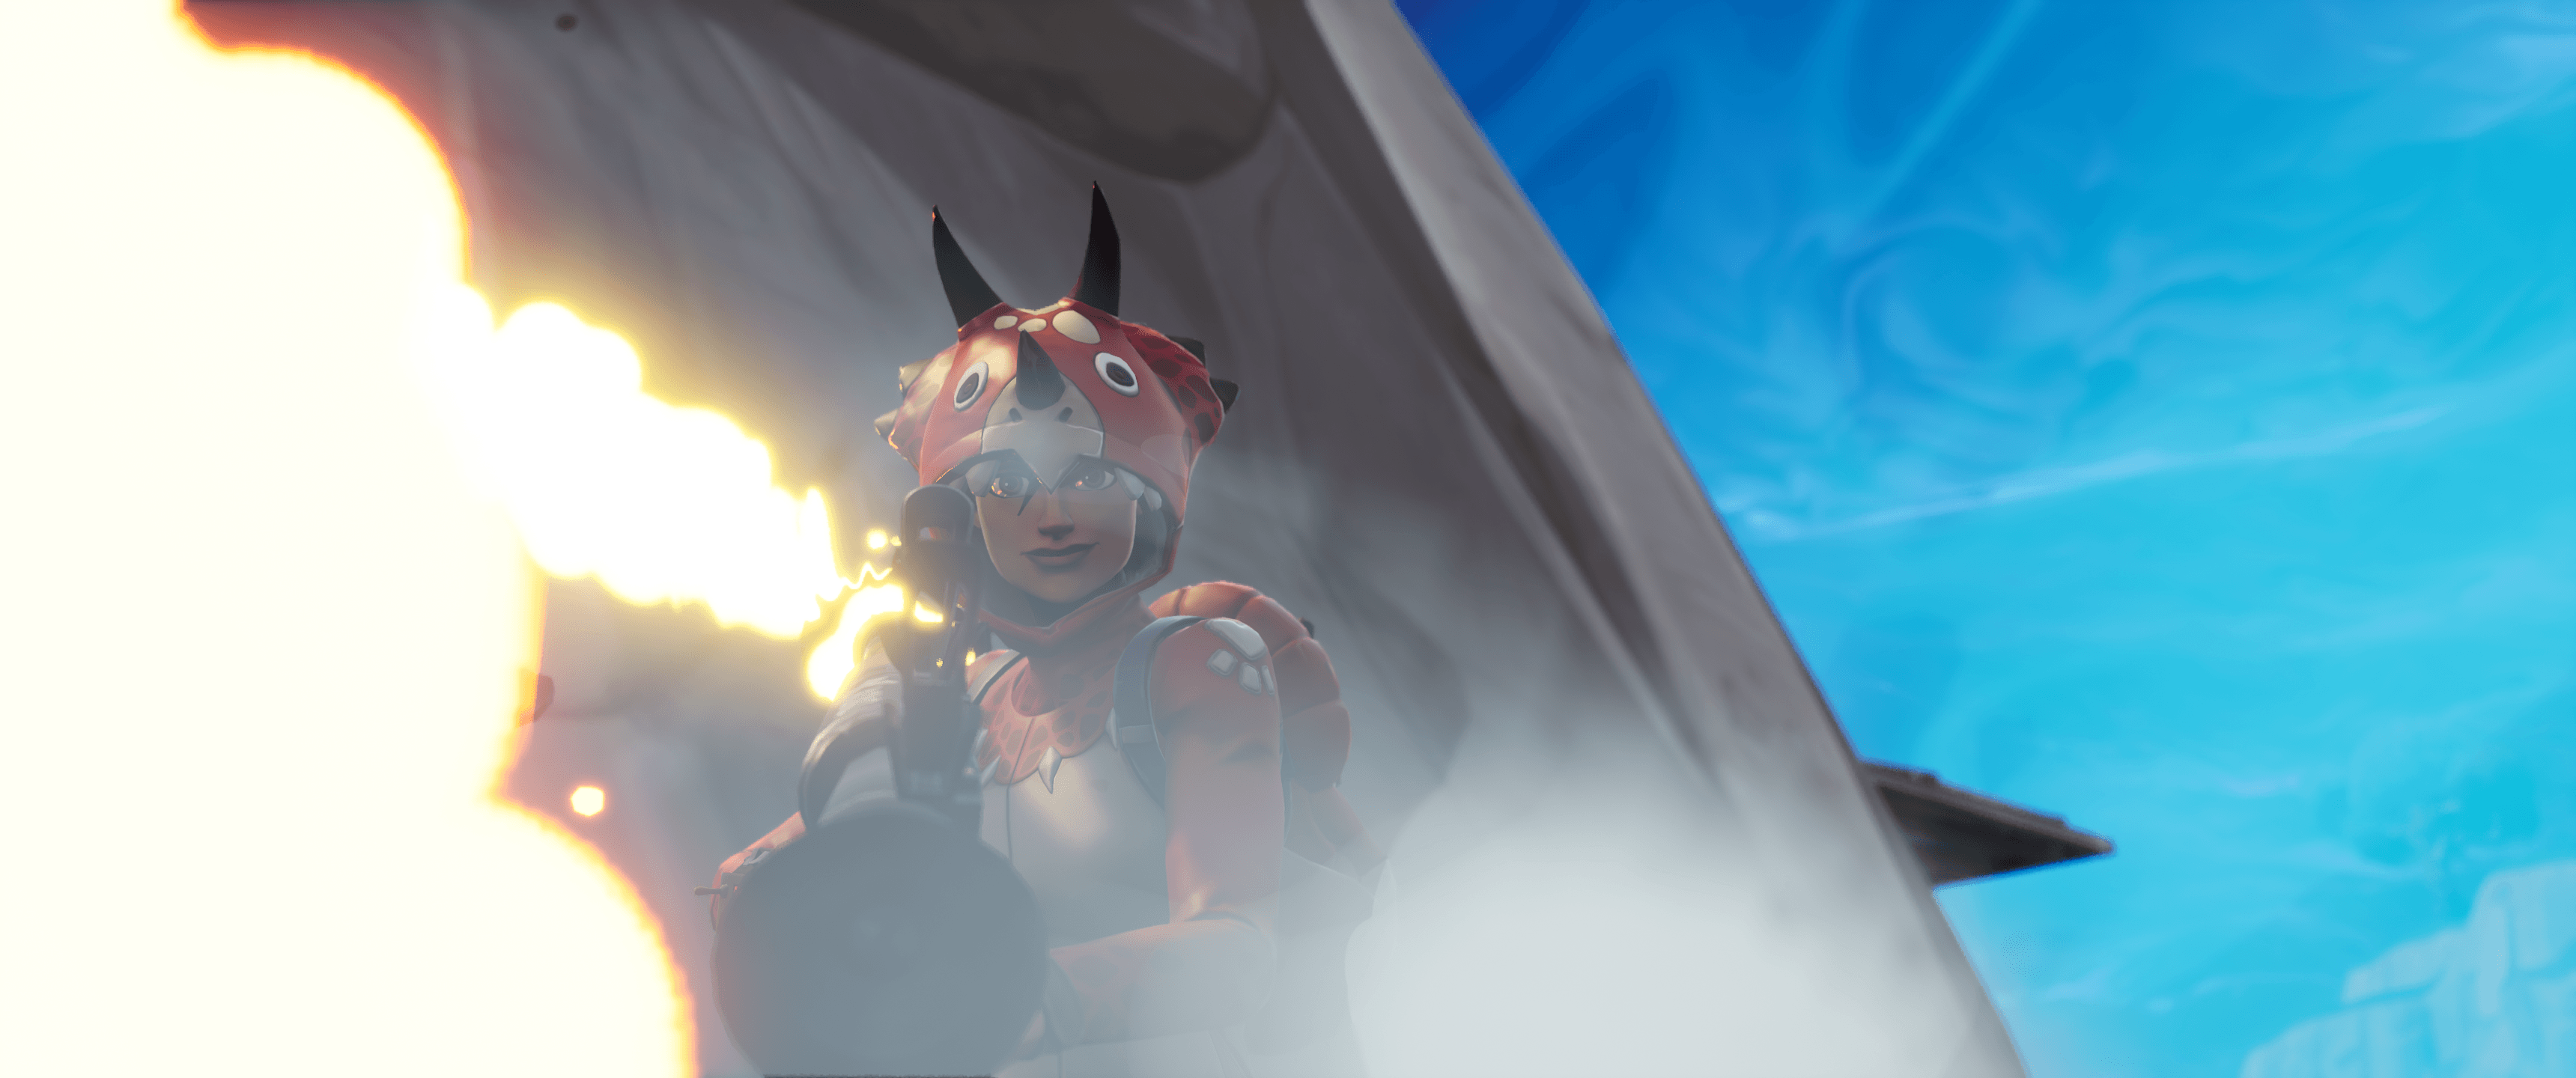 Tricera Ops Fortnite Wallpapers